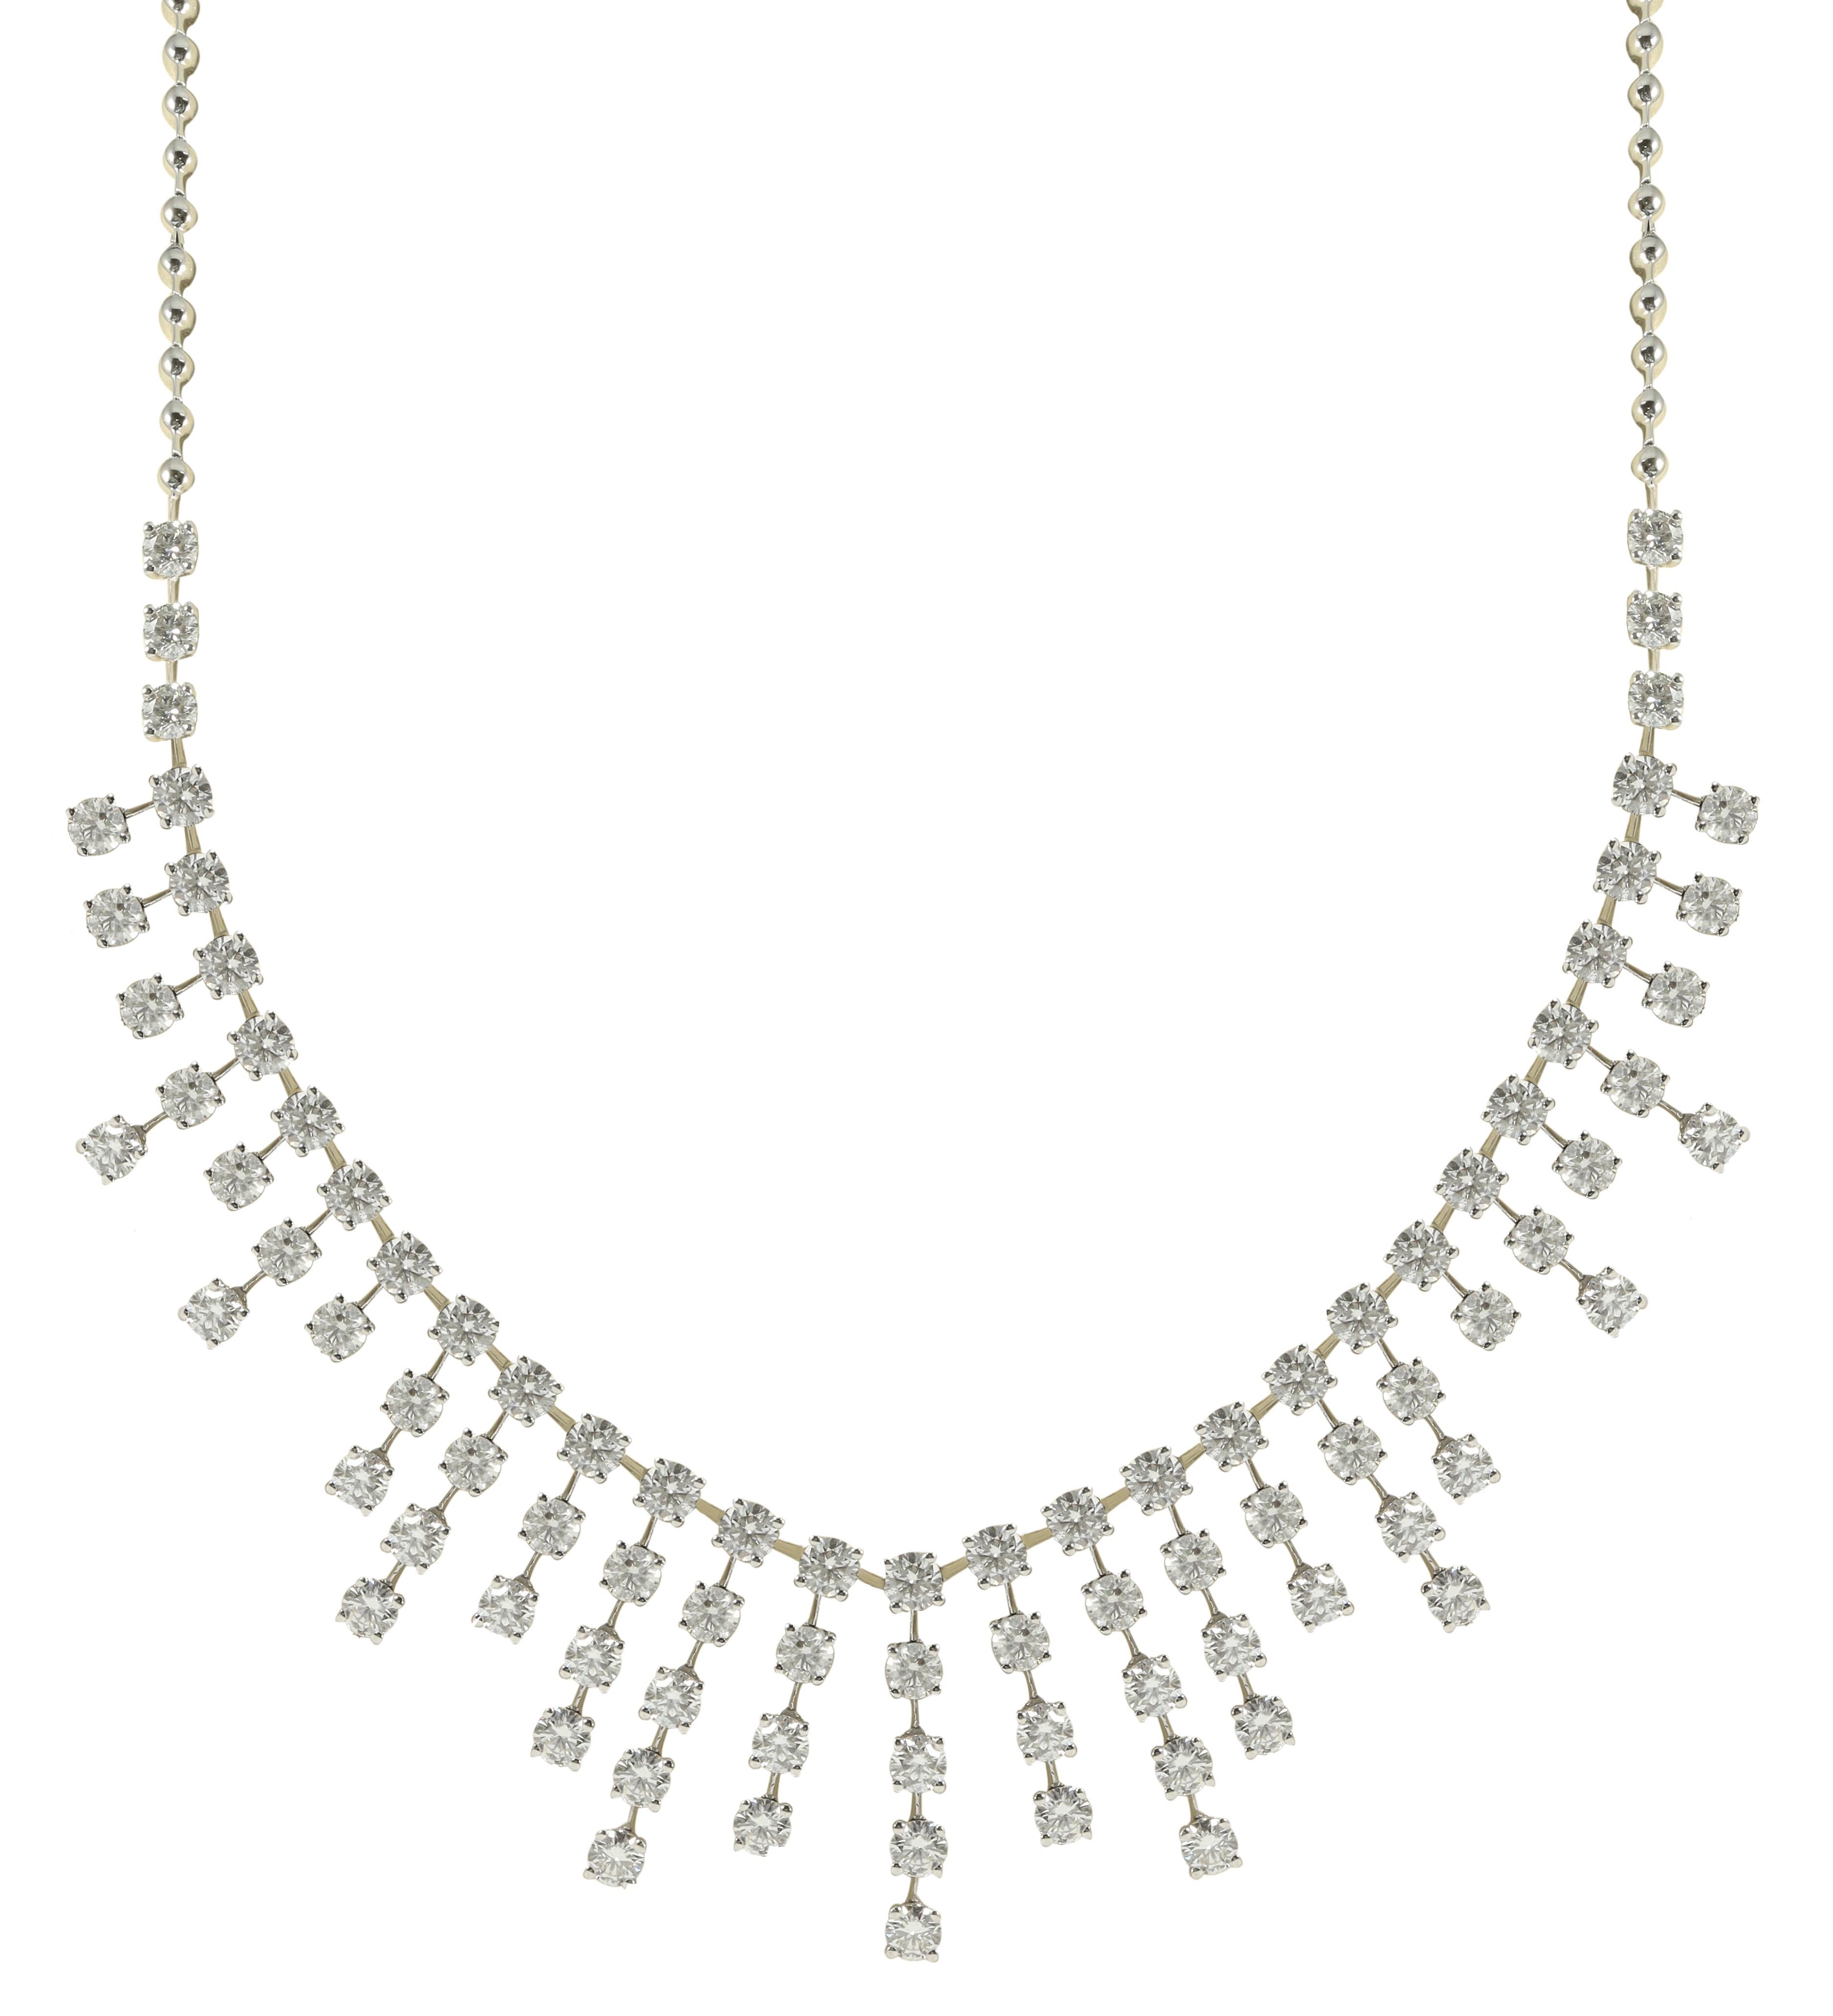 Modern 18kt Custom White Gold Fashion Necklace Featuring 15.84 cts of round diamonds For Sale